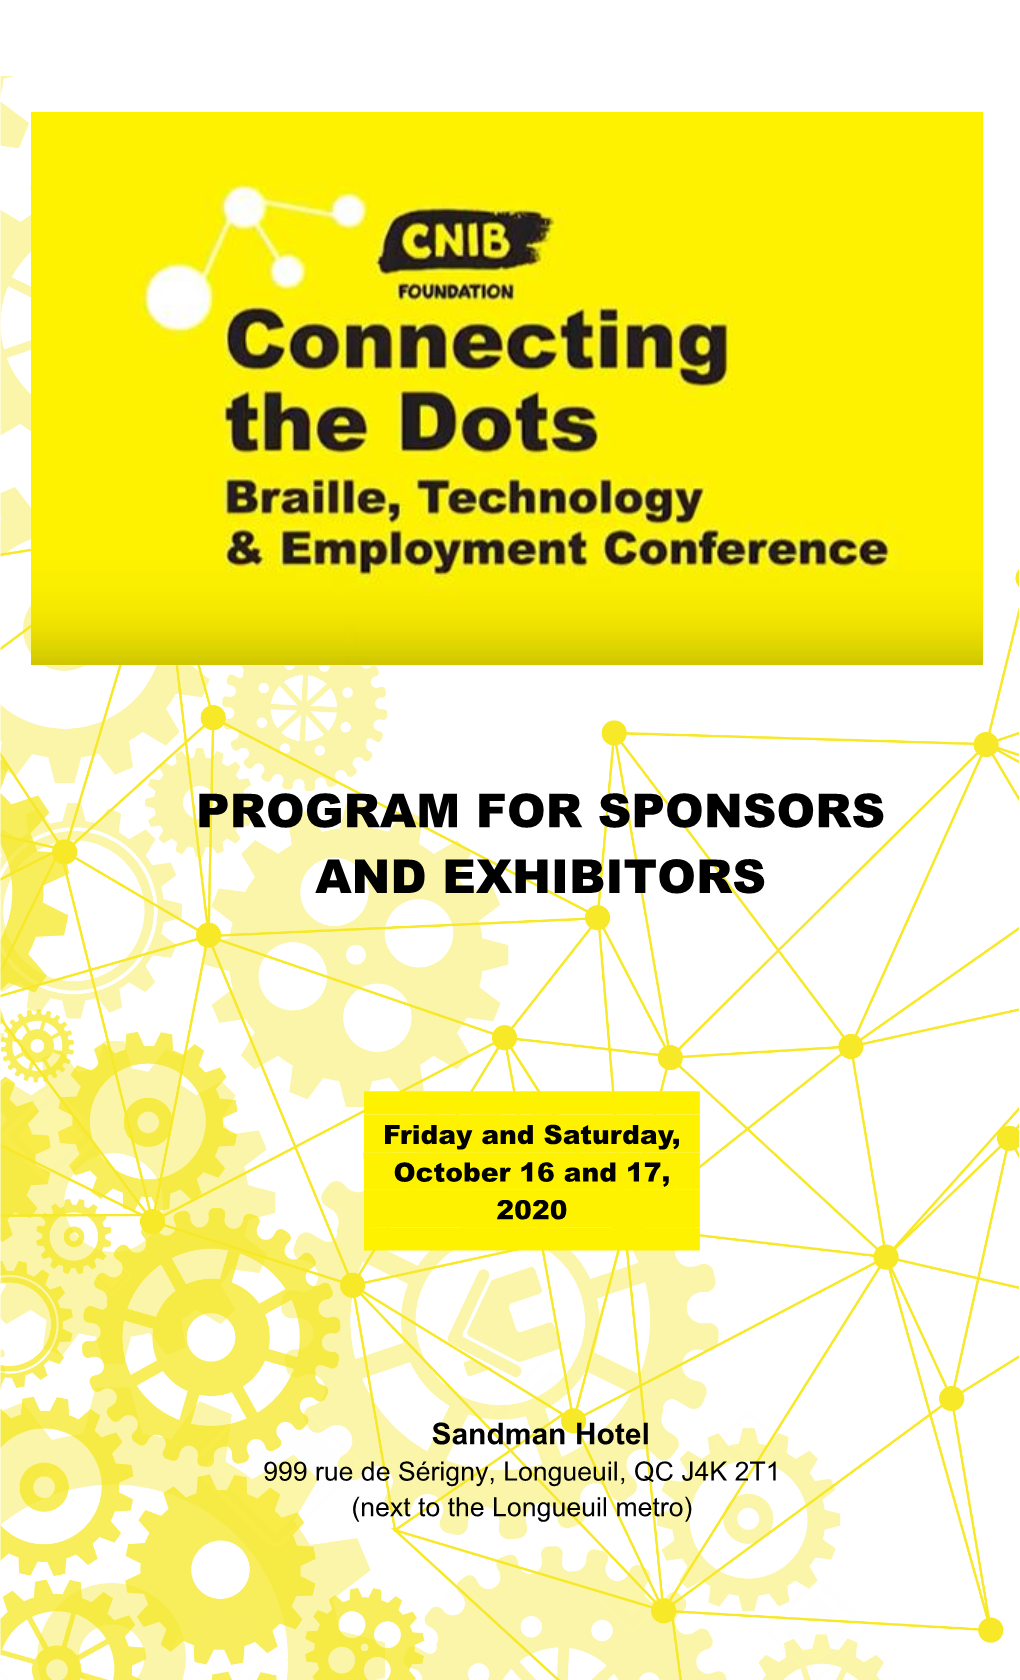 Program for Sponsors and Exhibitors